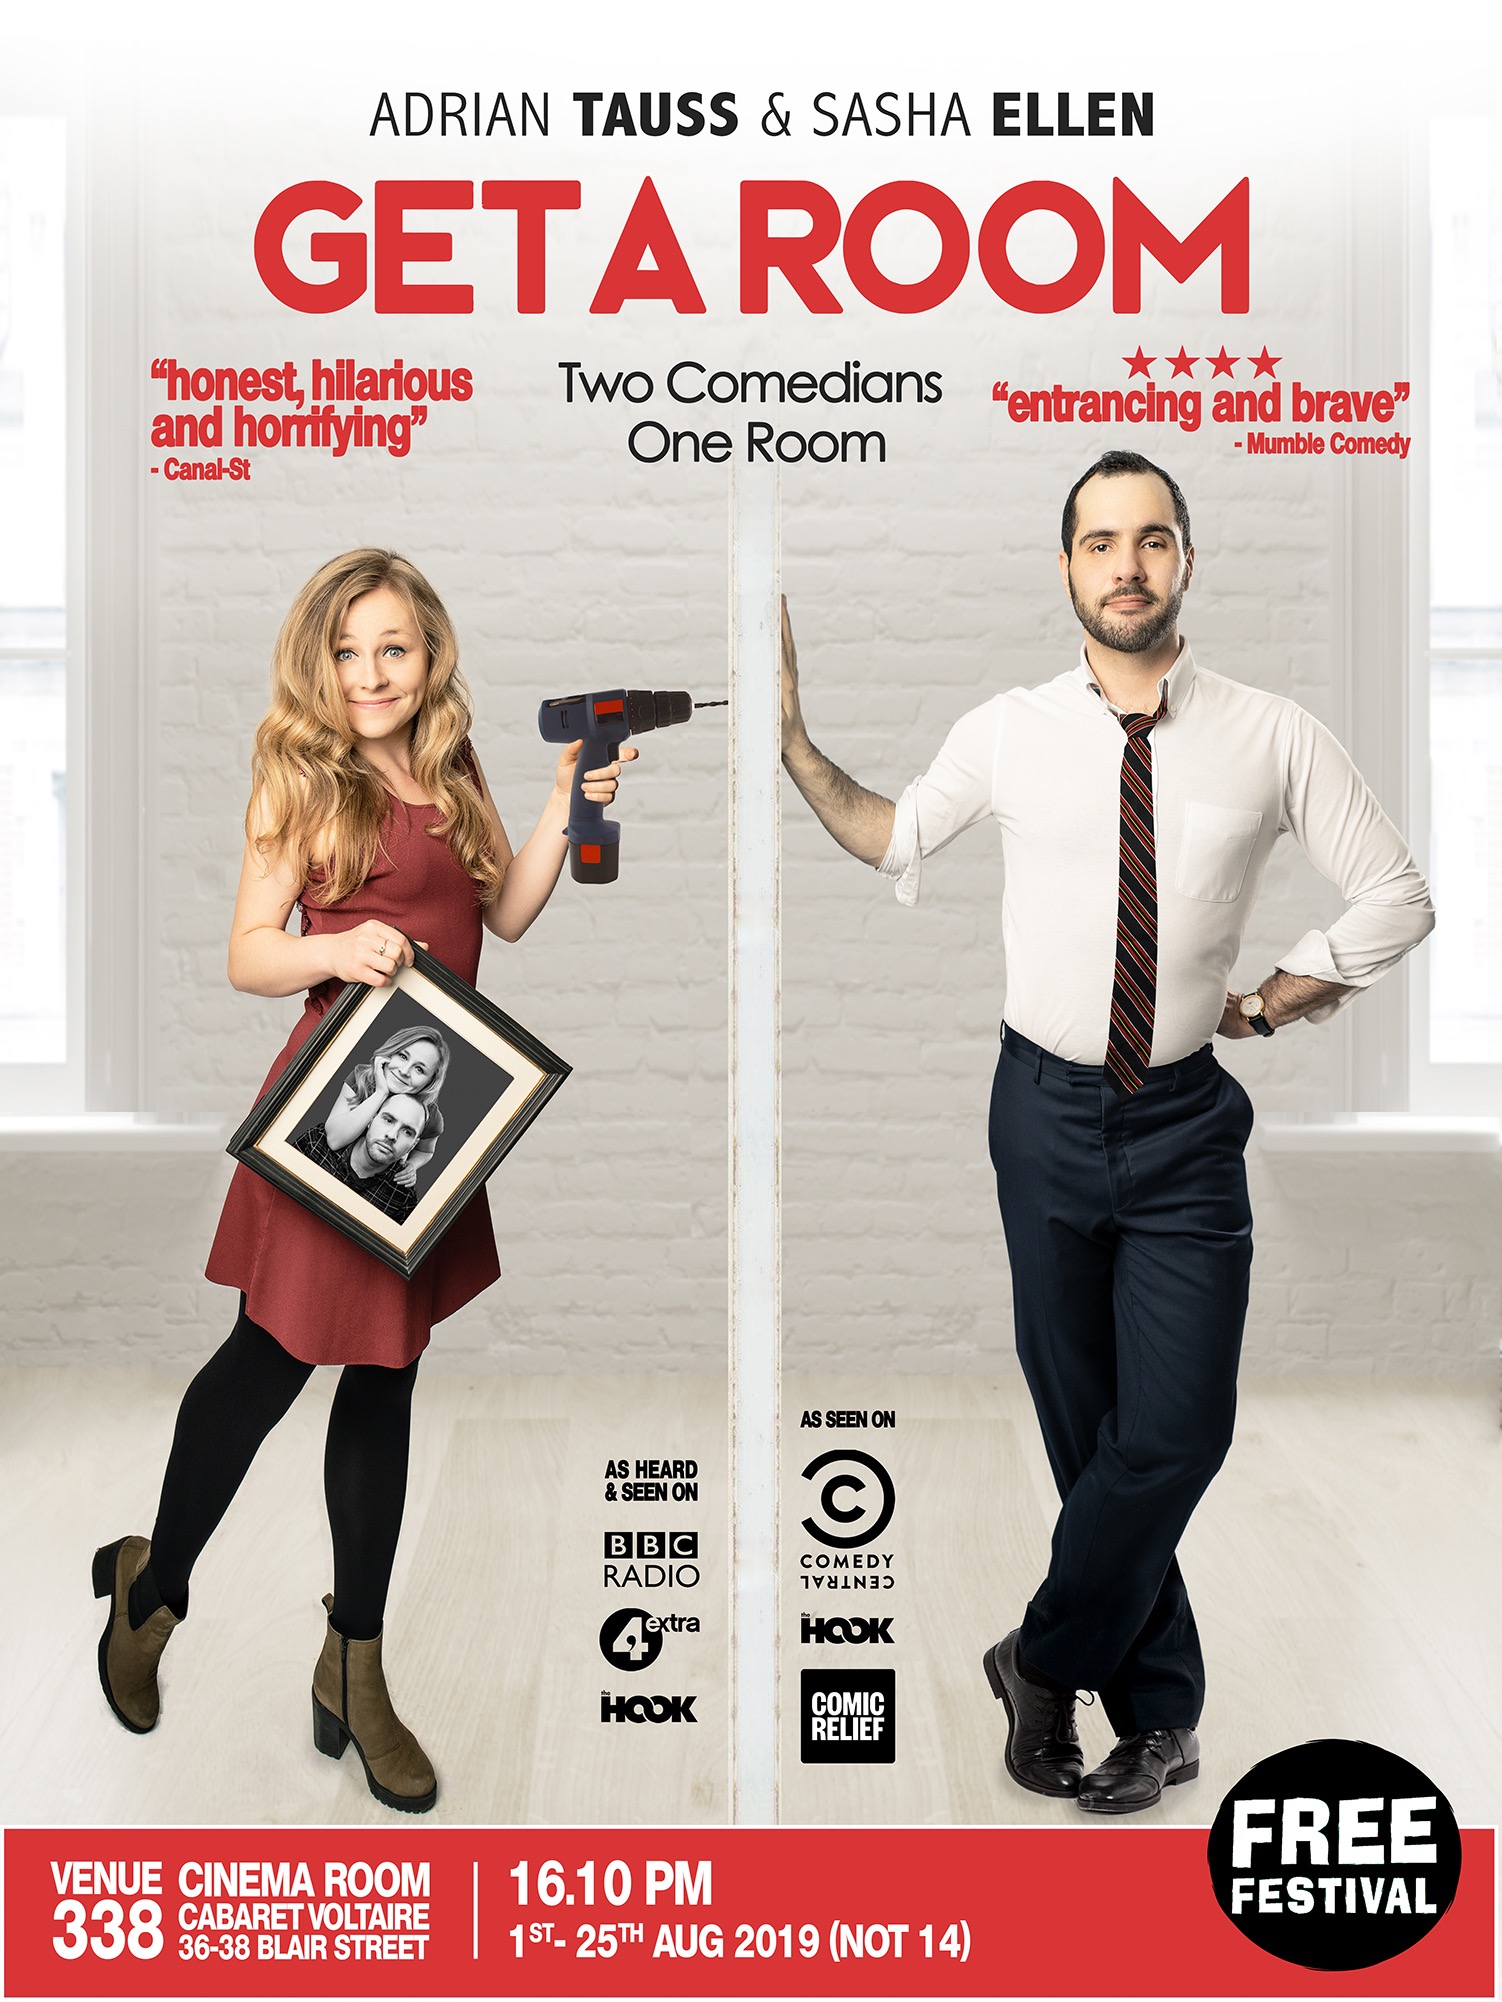 The poster for Adrian Tauss and Sasha Ellen: Get a Room